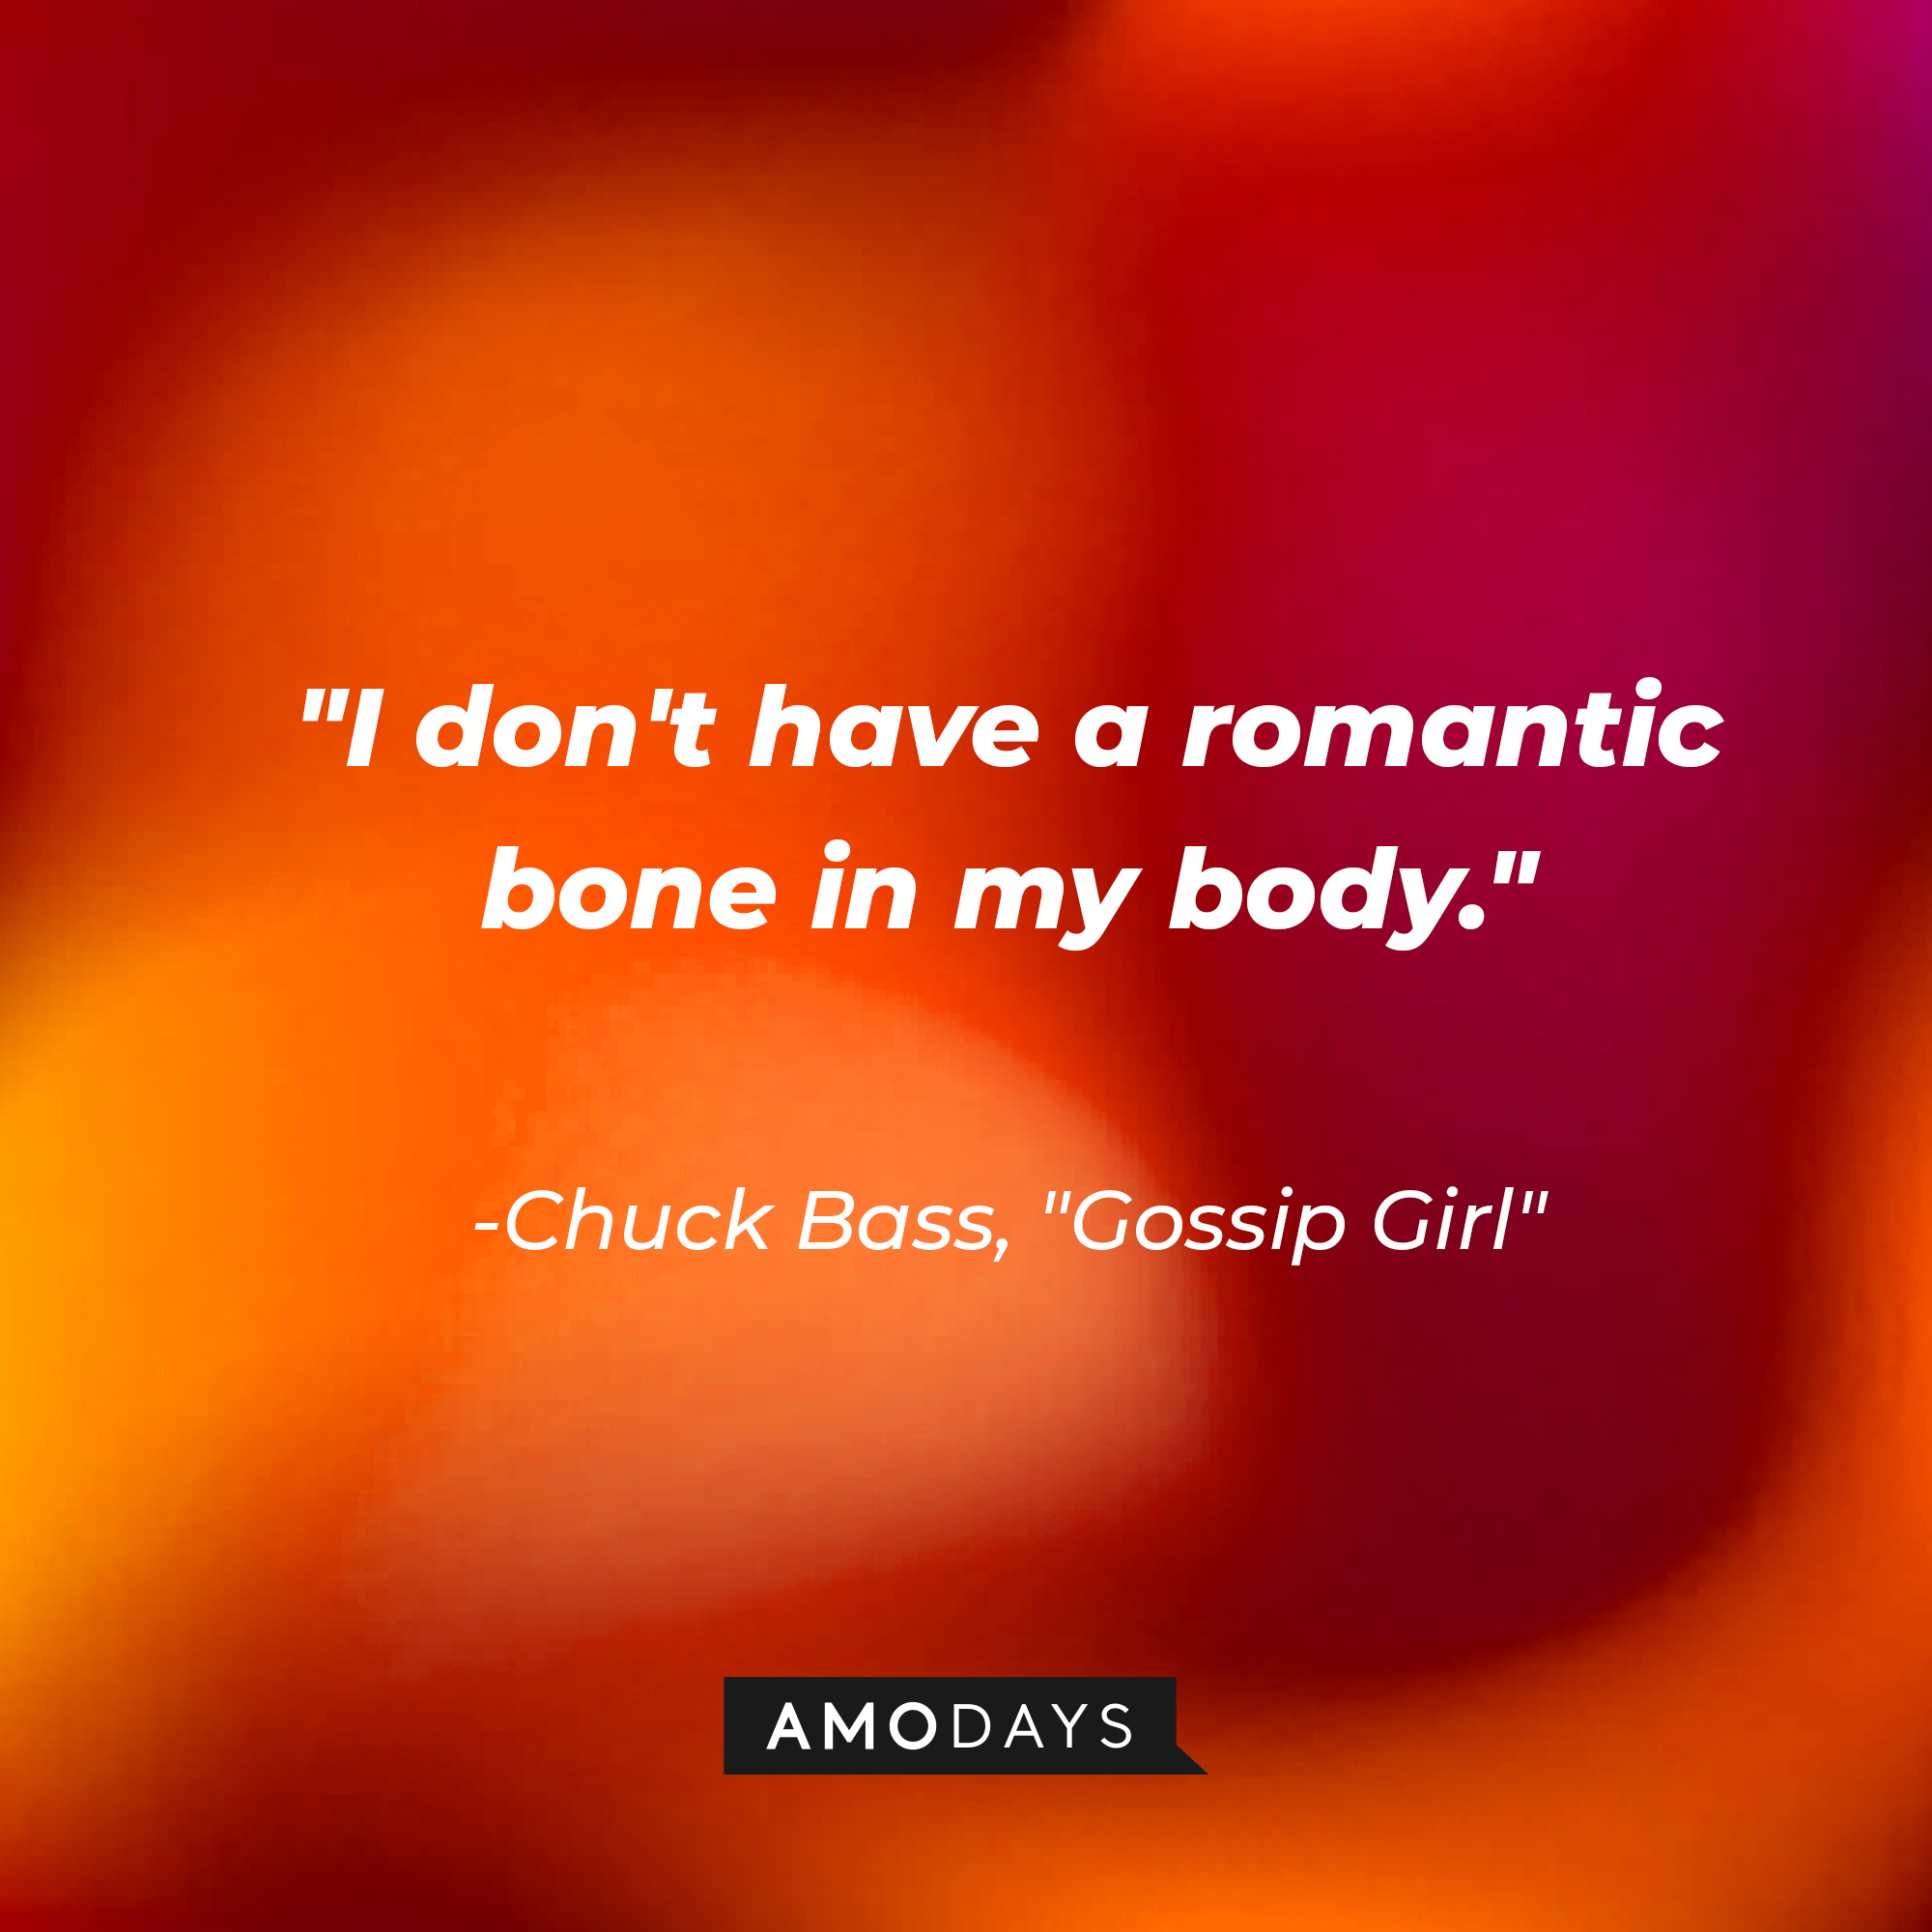 Chuck Bass' quote: "I don't have a romantic bone in my body." | Source: AmoDays